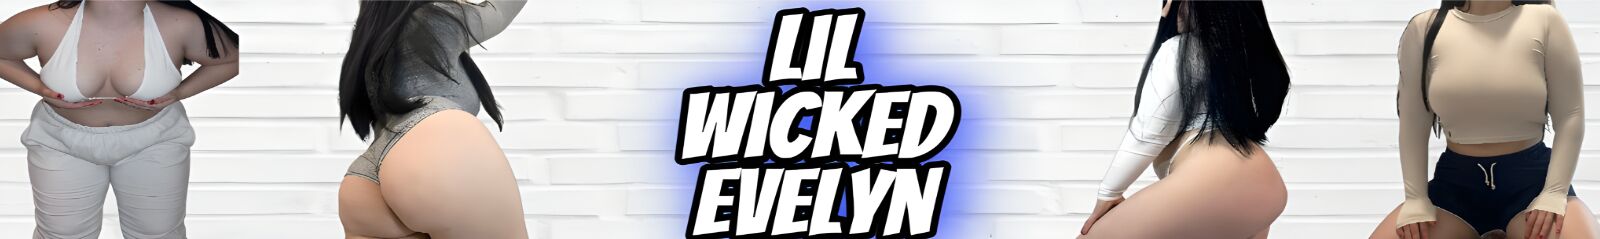 Lil Wicked Evelyn